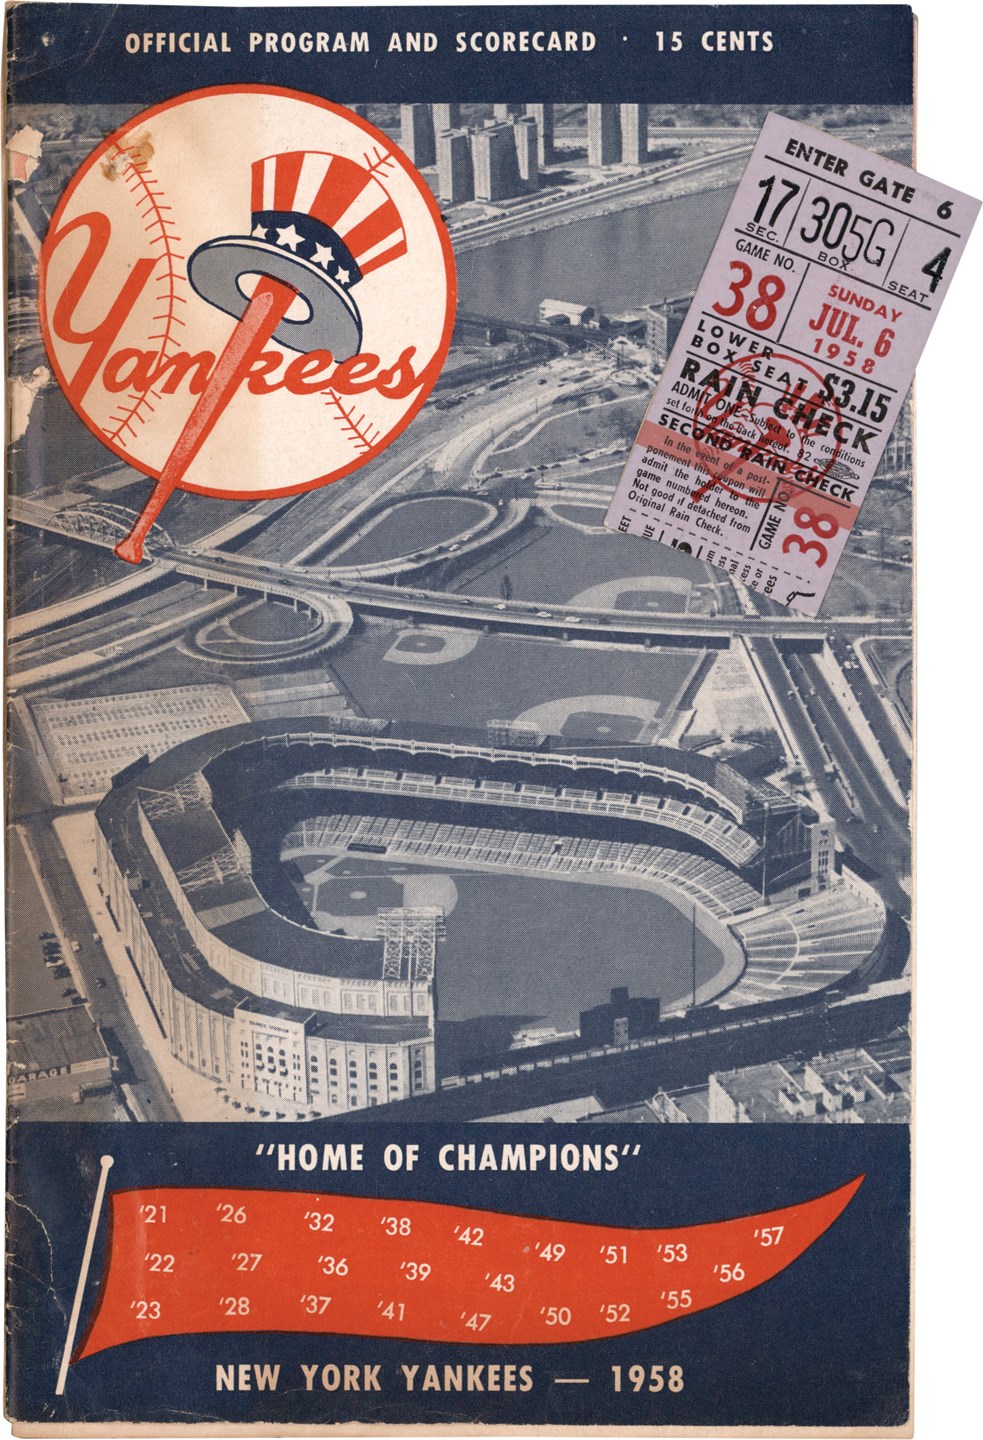 - 4/6/58 Mickey Mantle & Ted Williams Home Run in Same Game Ticket Stub and Program